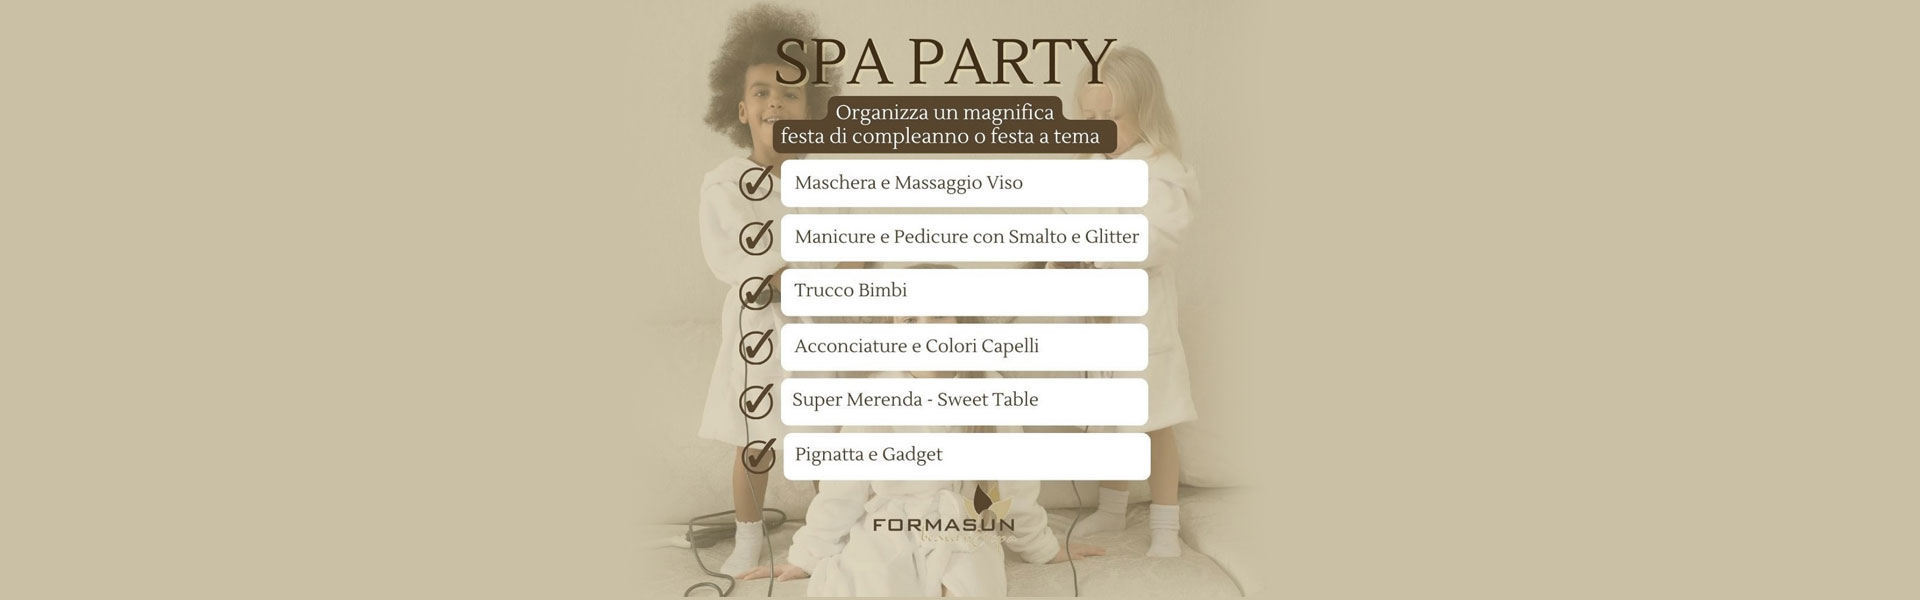 spa party